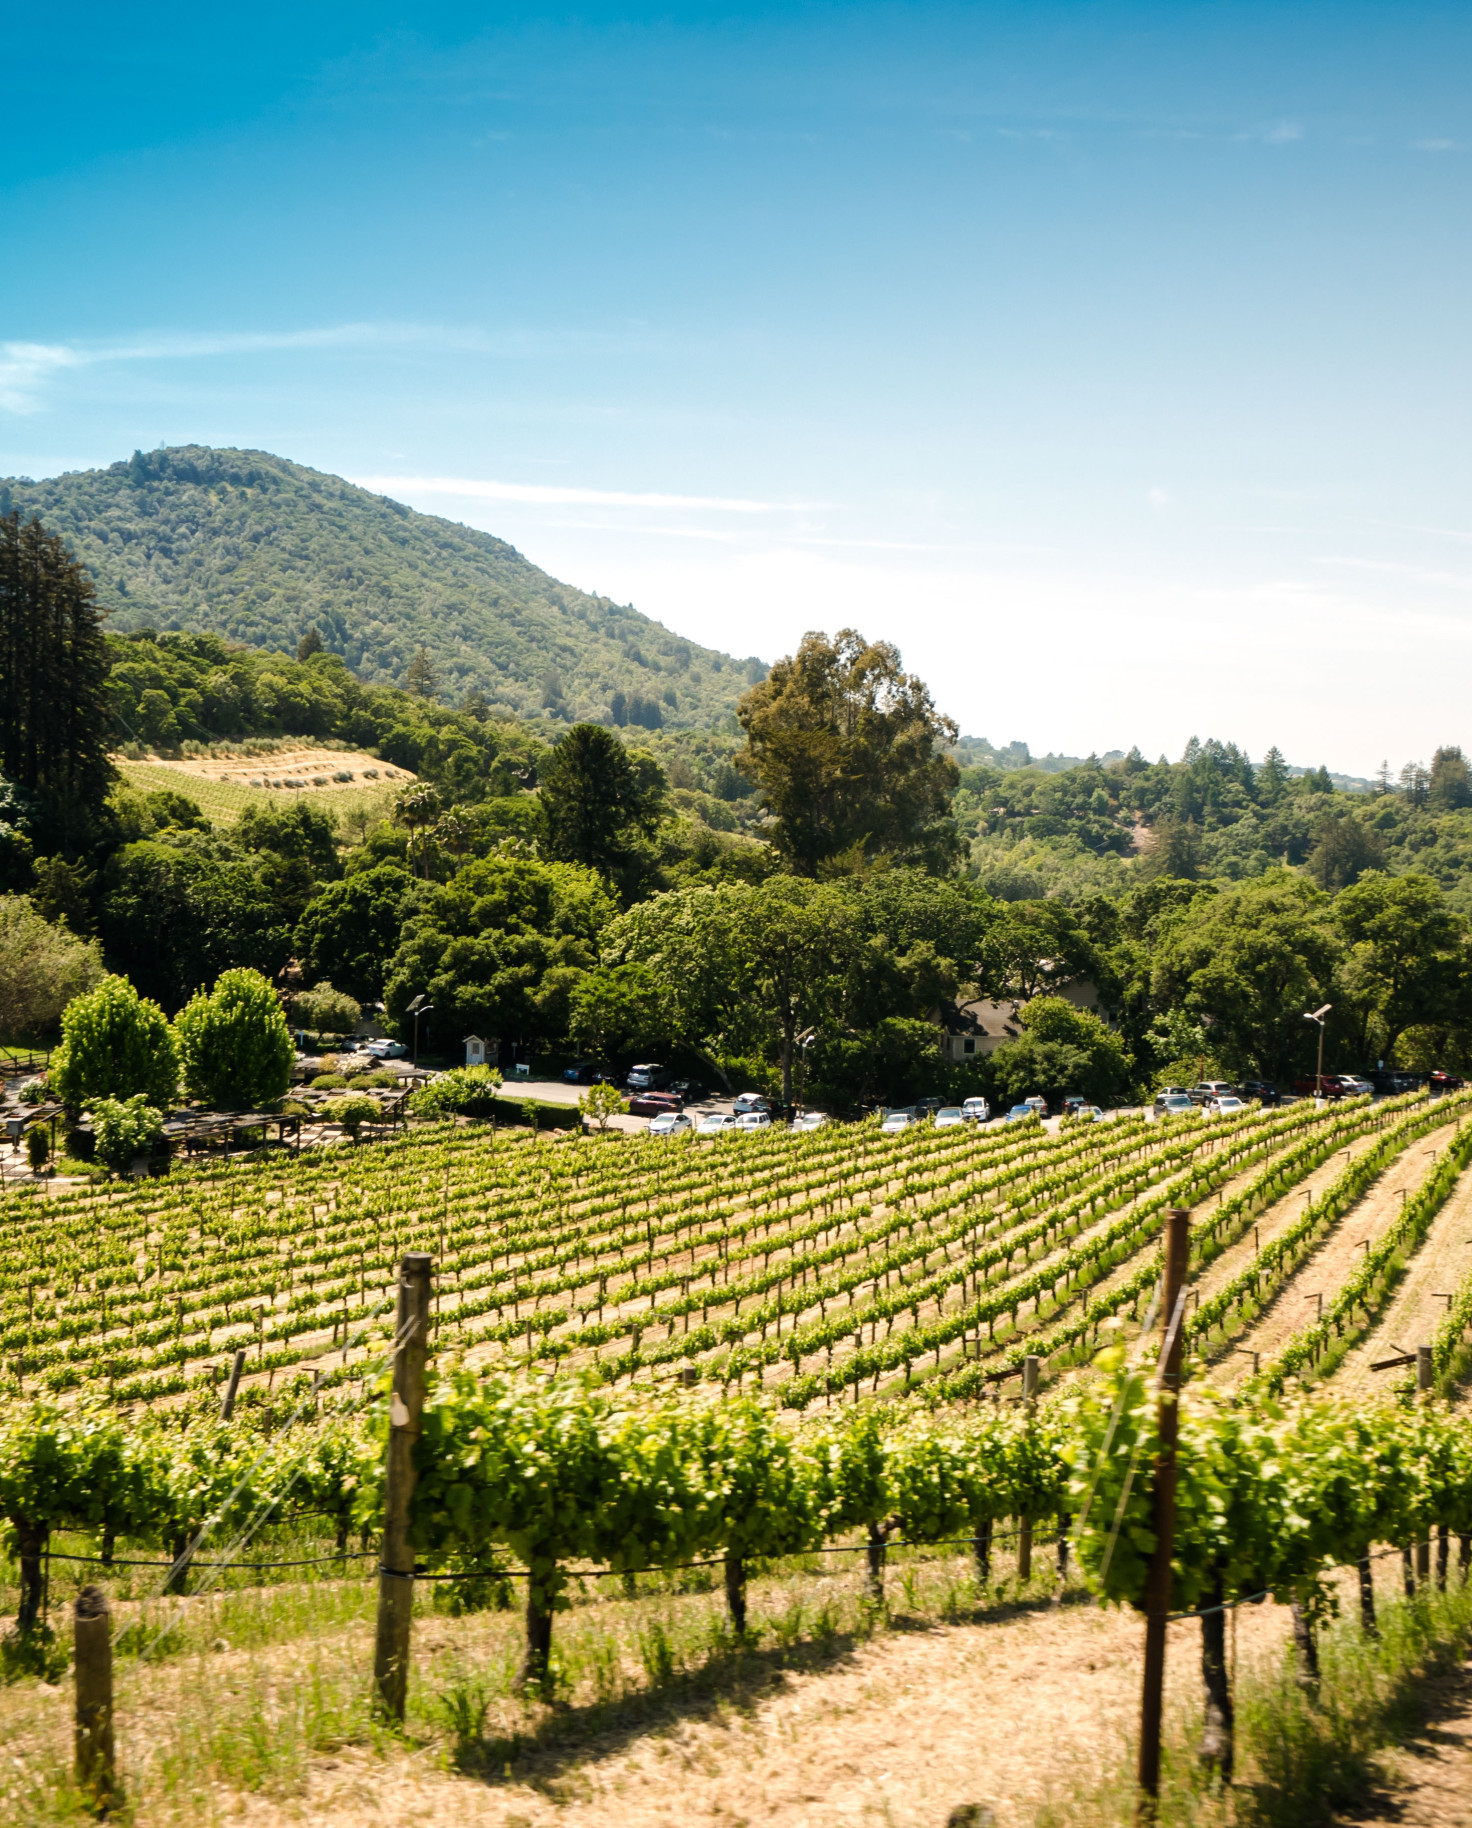 Green vineyard in California with trees and mountains in the background on a sunny day